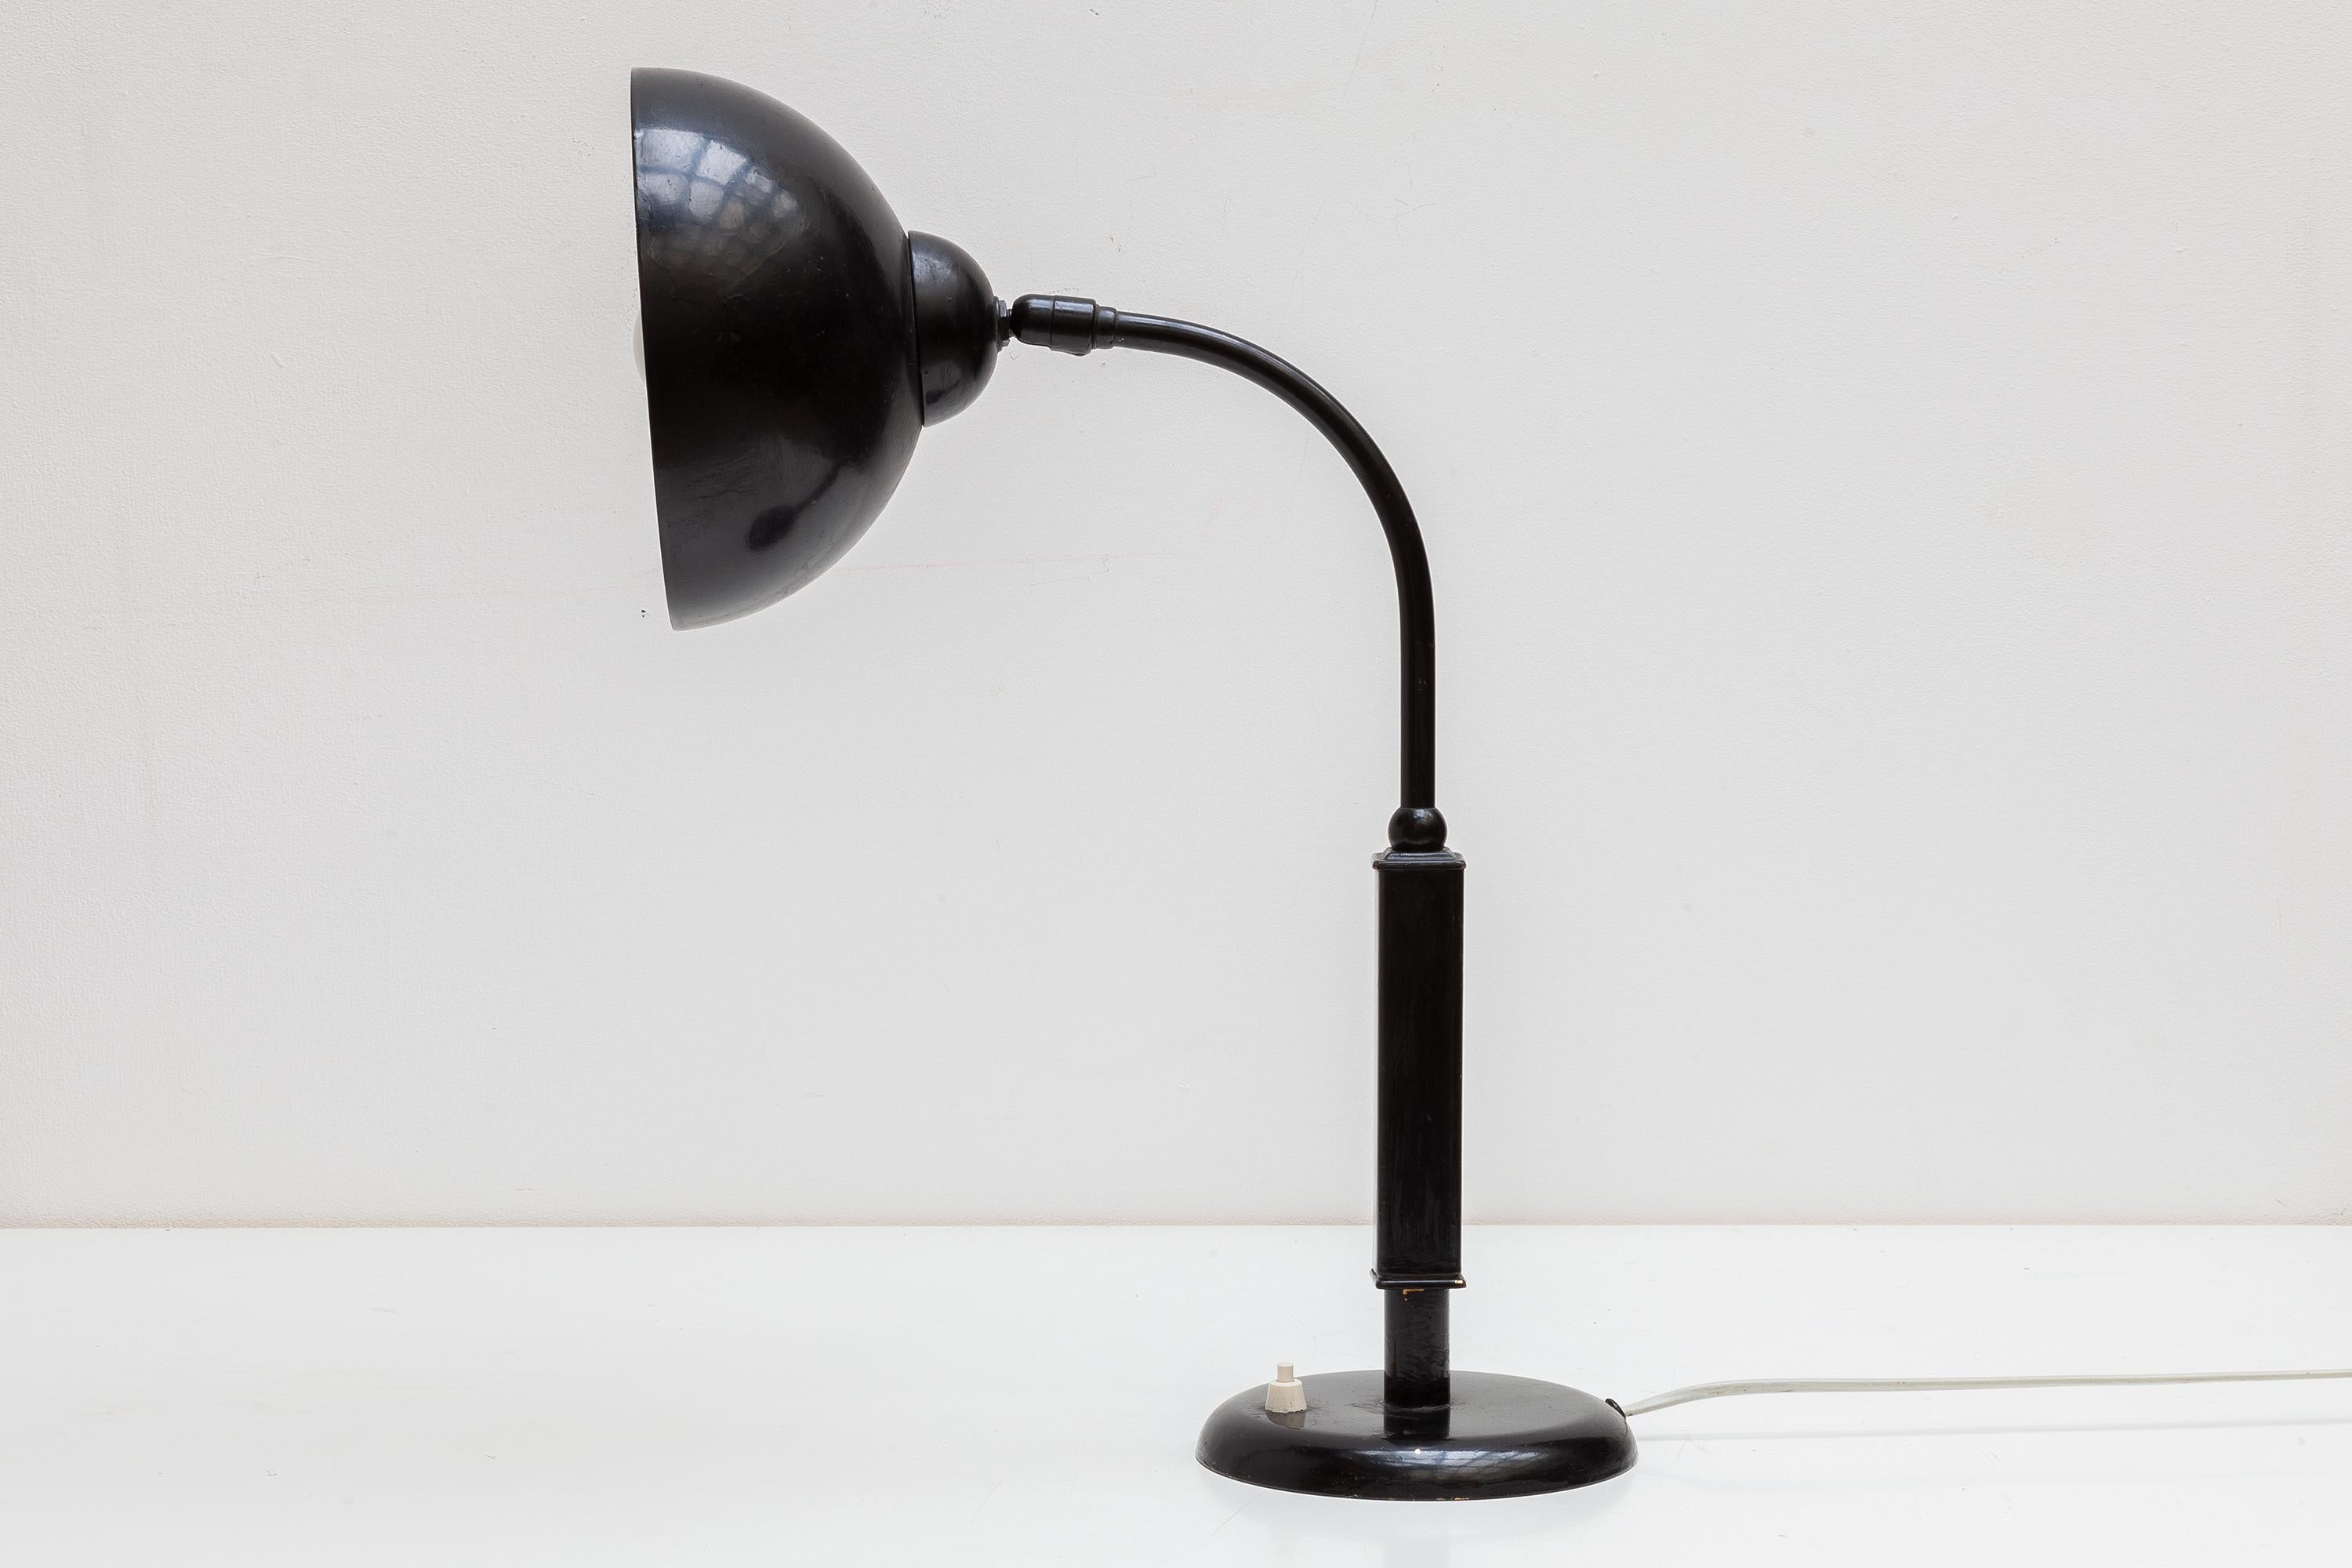 Lacquered Rare Black Bauhaus Desk lamp designed by Cristian Dell by Kaiser 1930s  For Sale